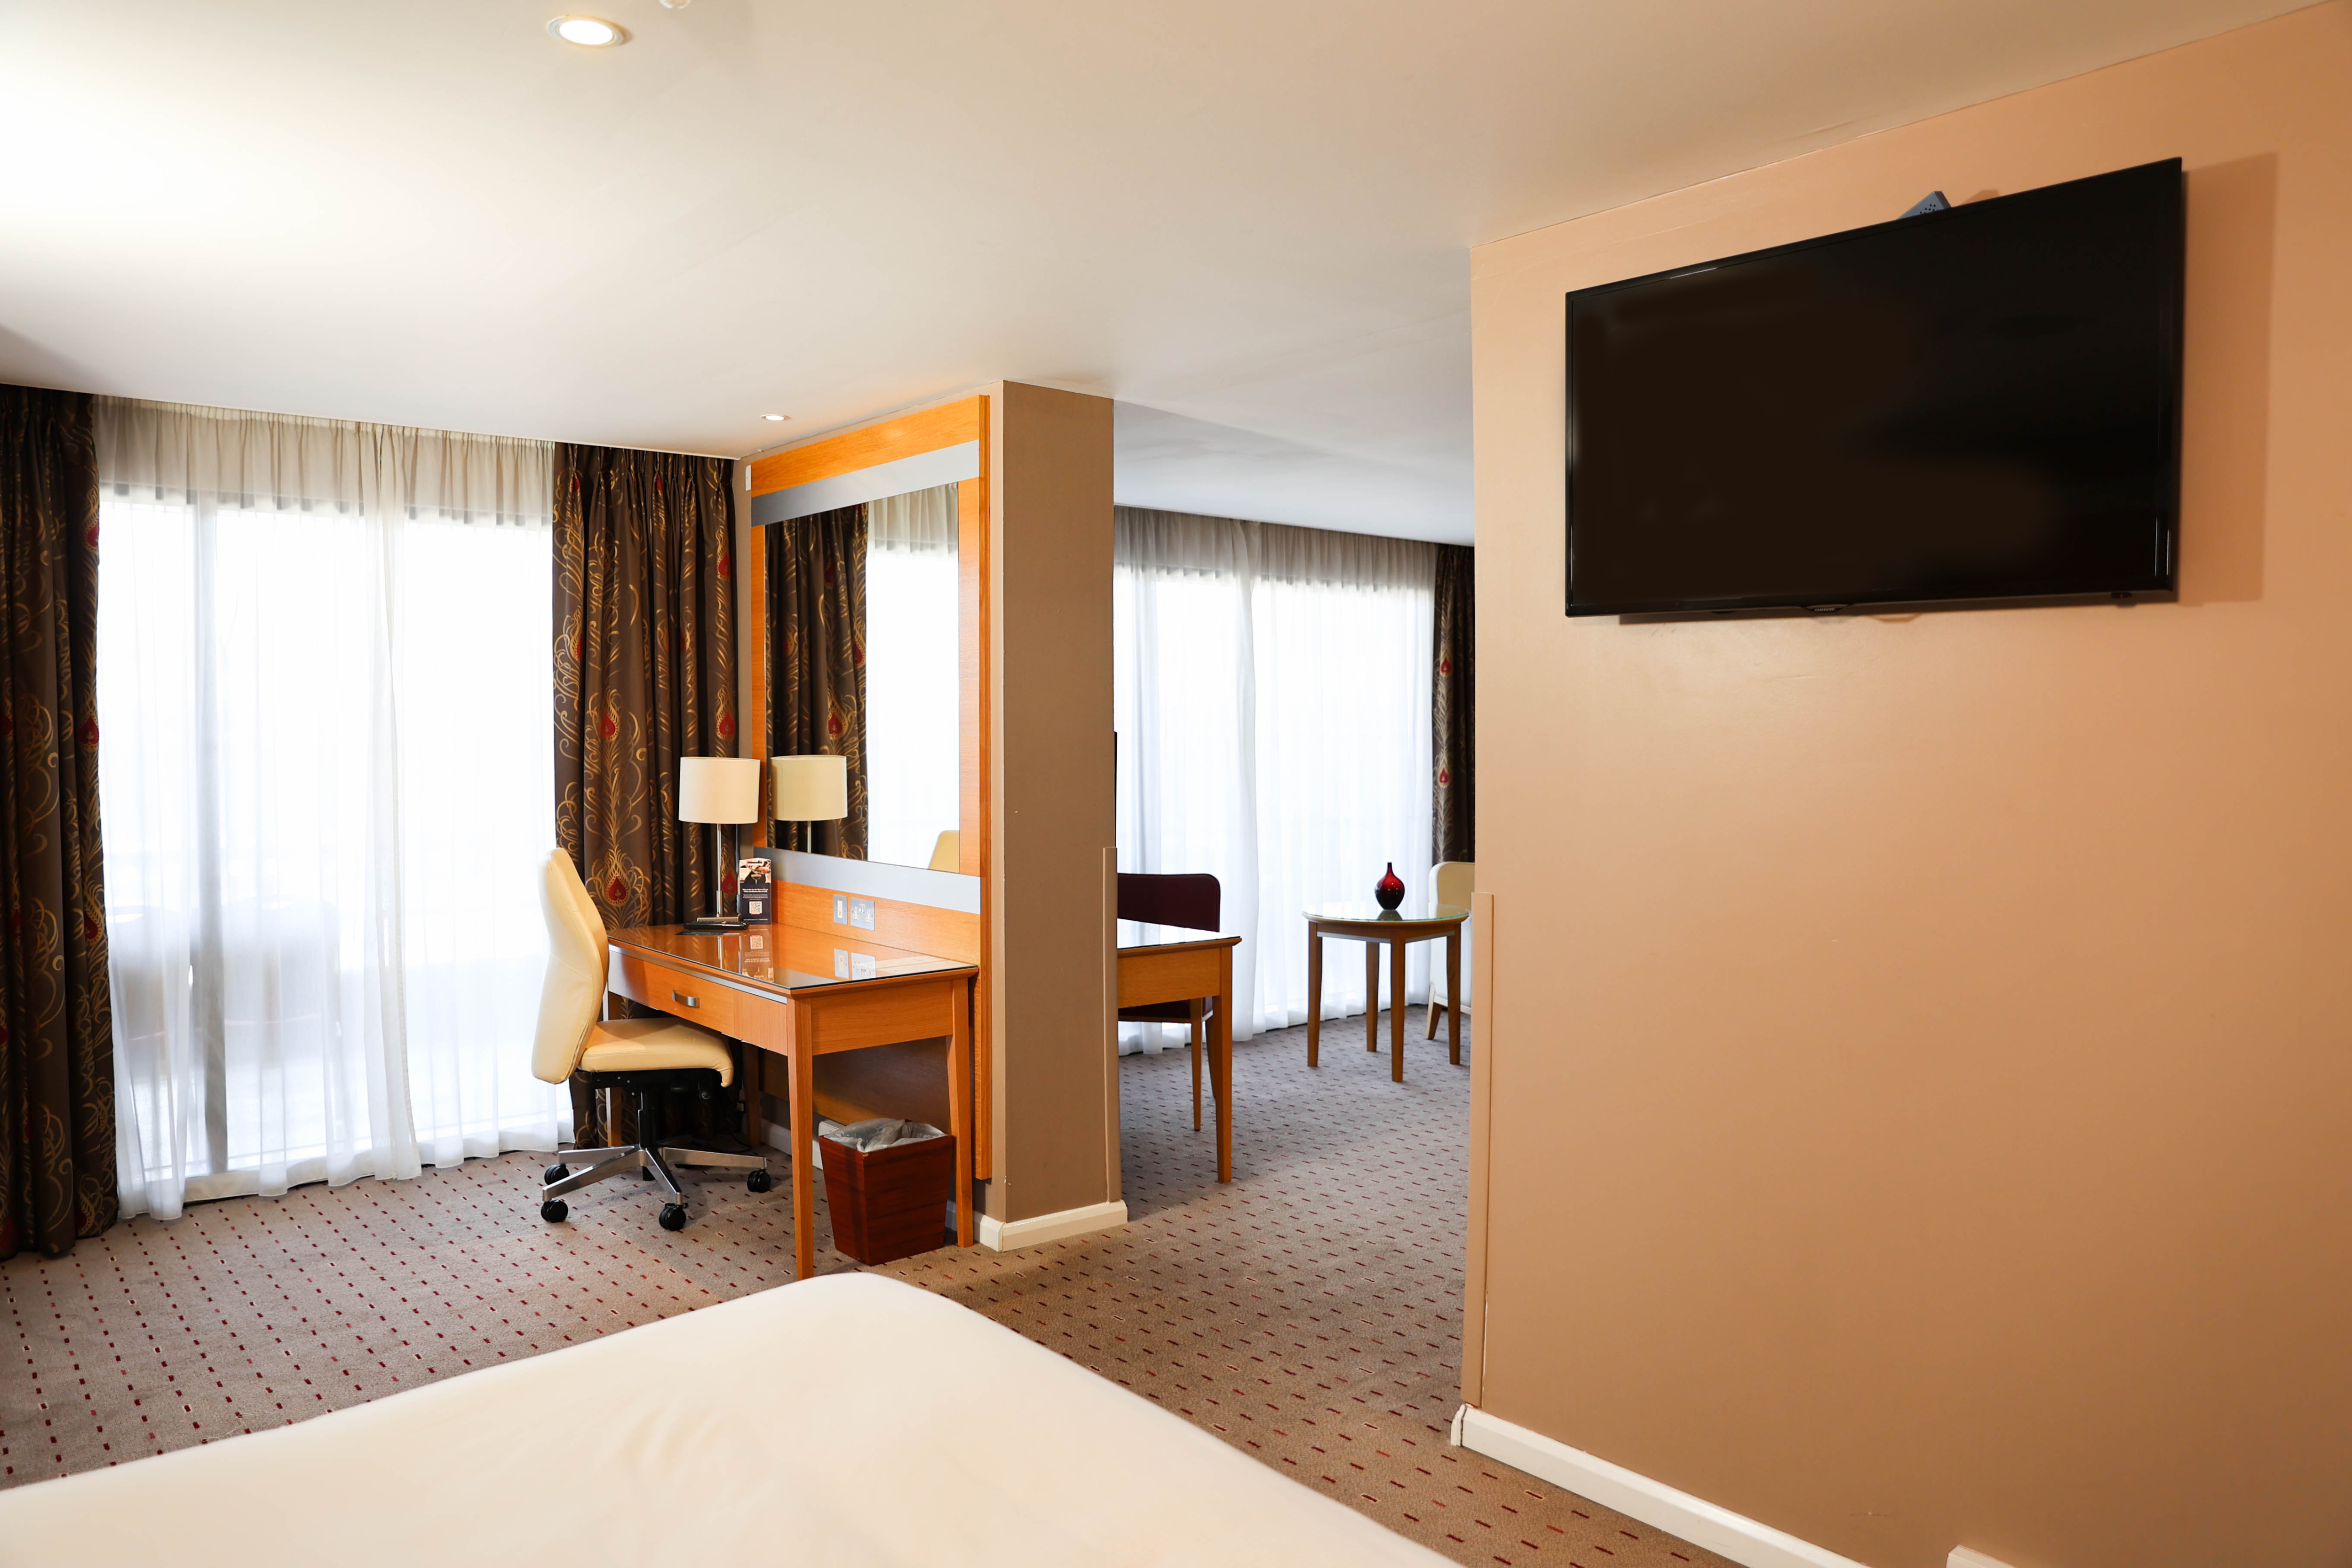 Desk, HDTV and Bed in a Junior Suite